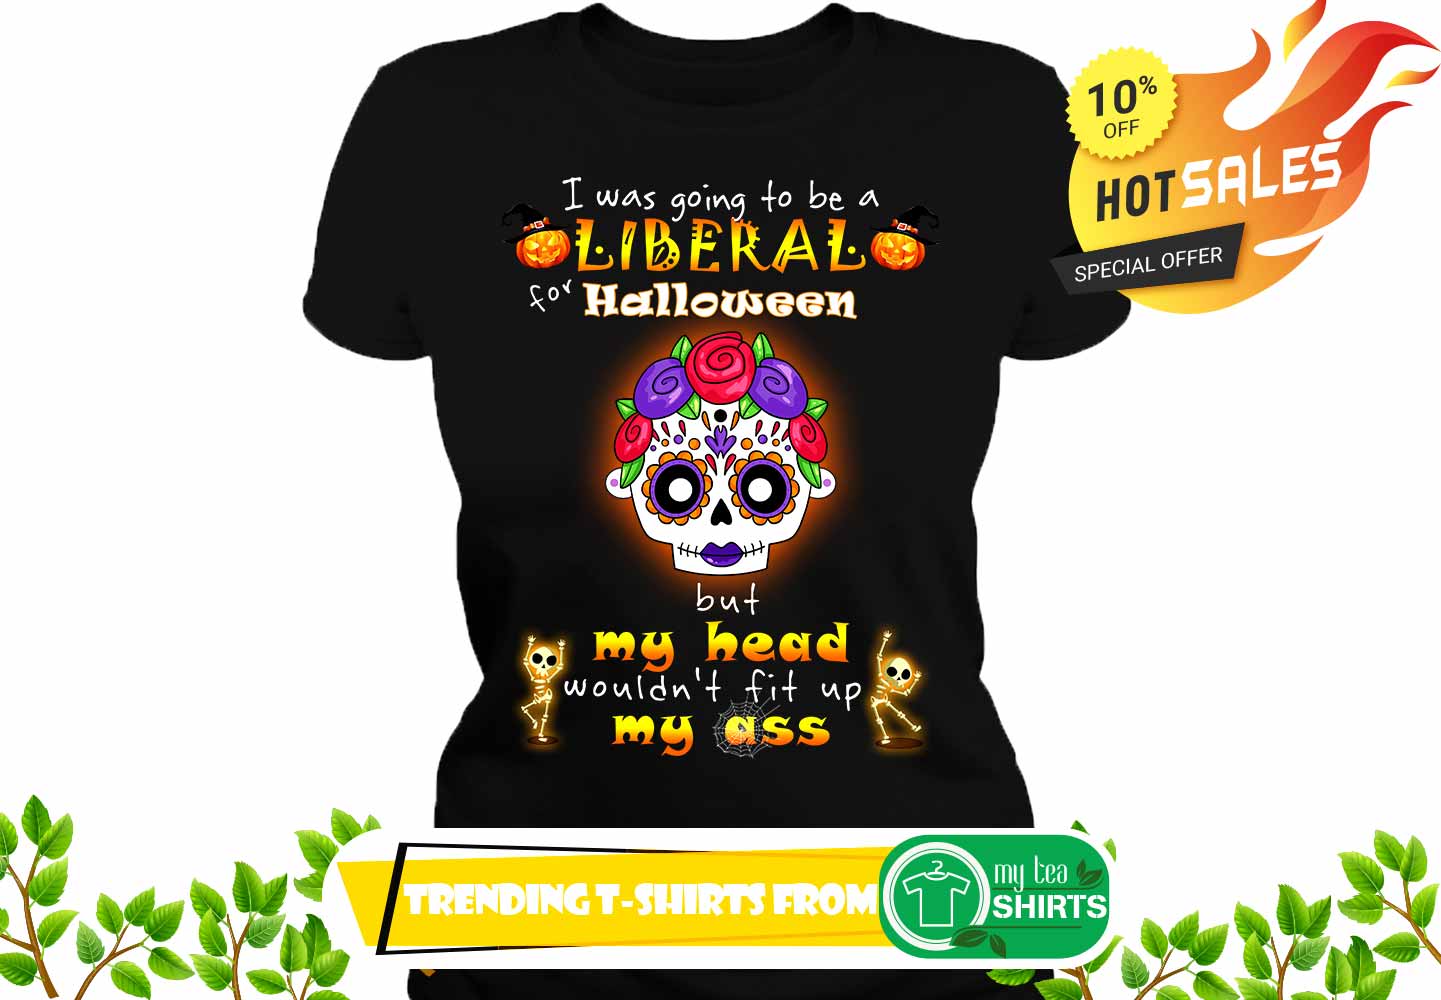 Poco Loco I was going to be a Liberal for Halloween but my head wouldn't fit up my ass shirt